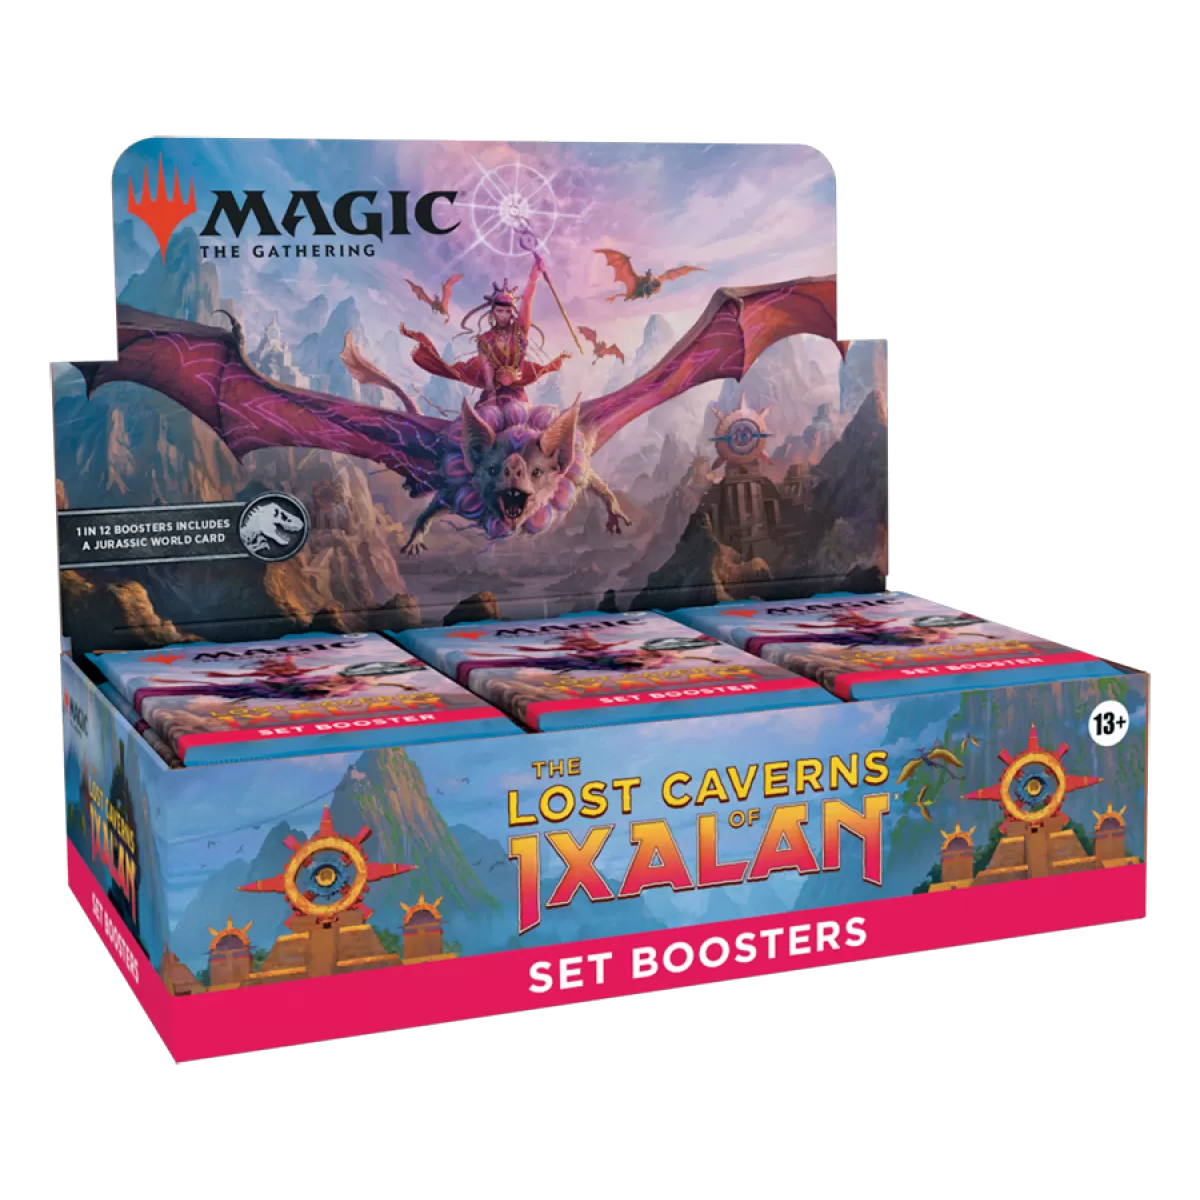 Magic: The Gathering - The Lost Caverns of Ixalan Set Booster Box *Sealed*